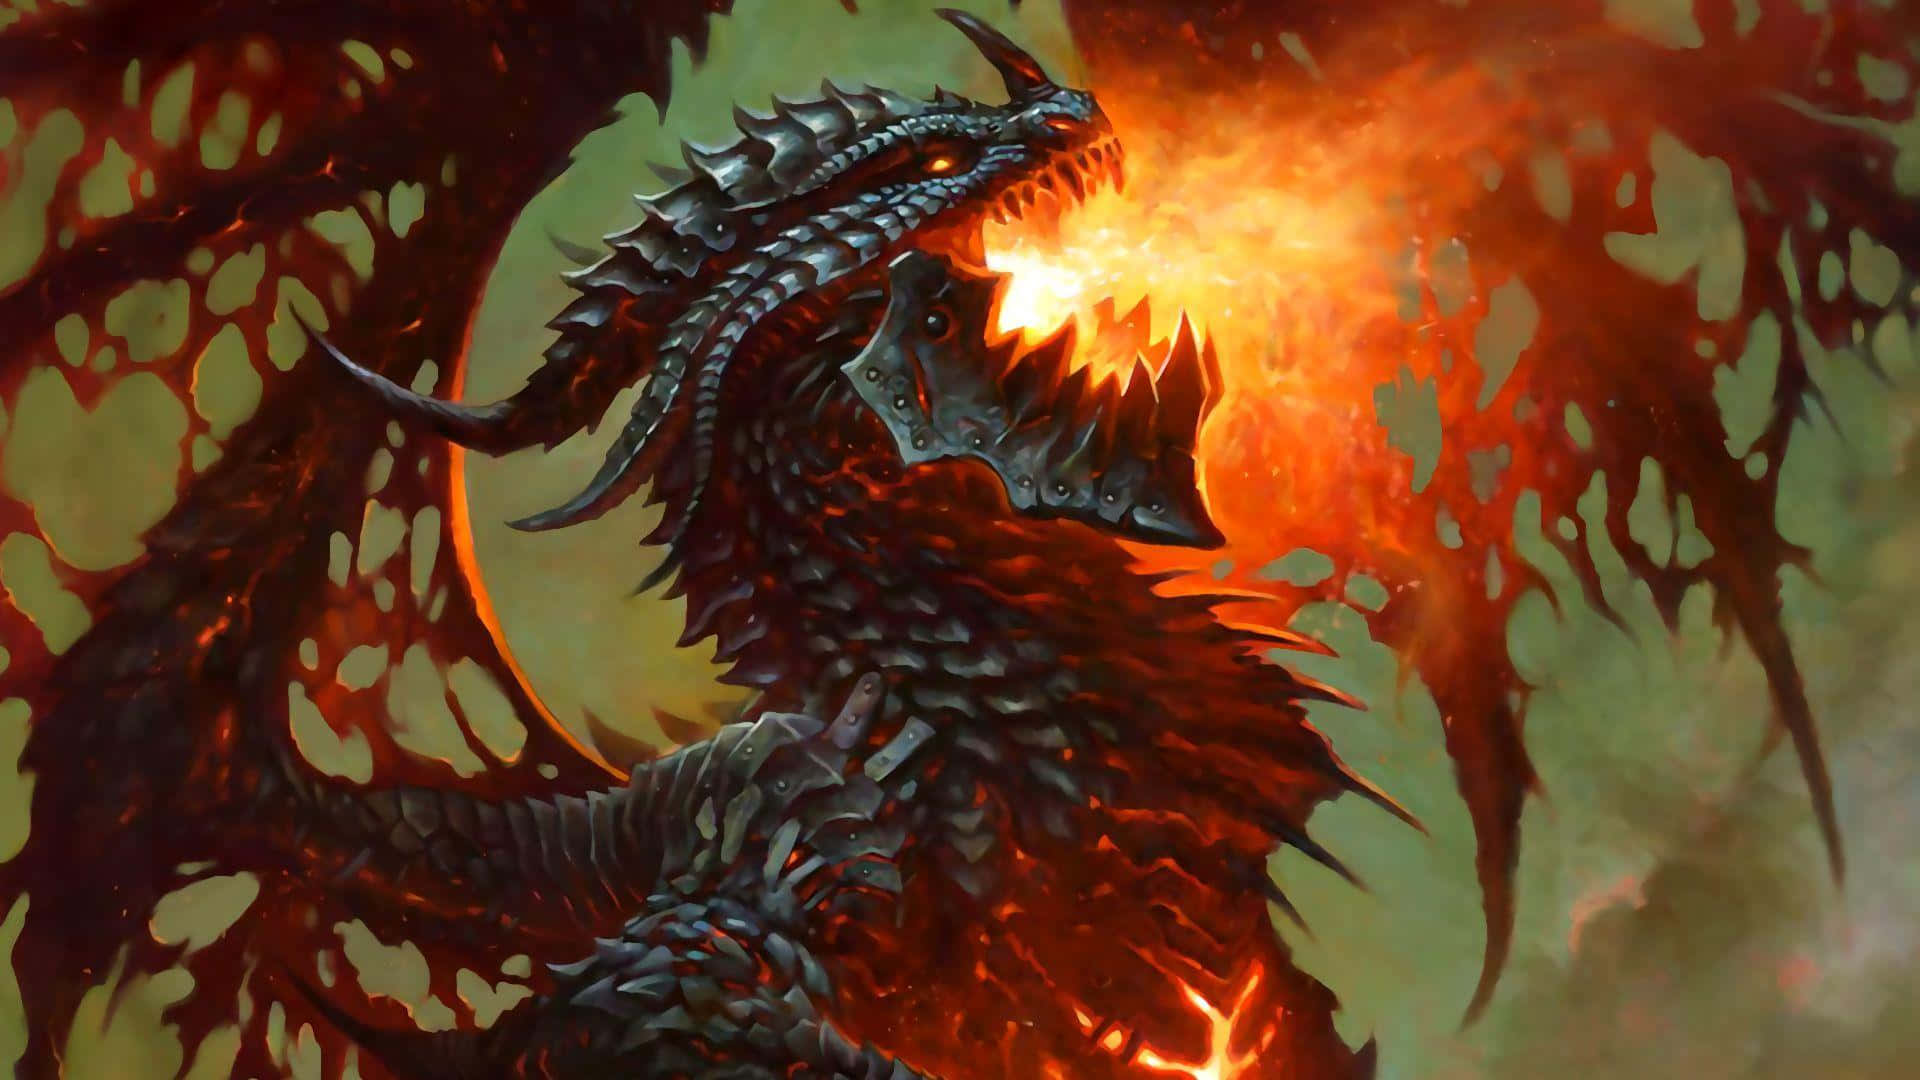 A Dragon With Fire Coming Out Of Its Mouth